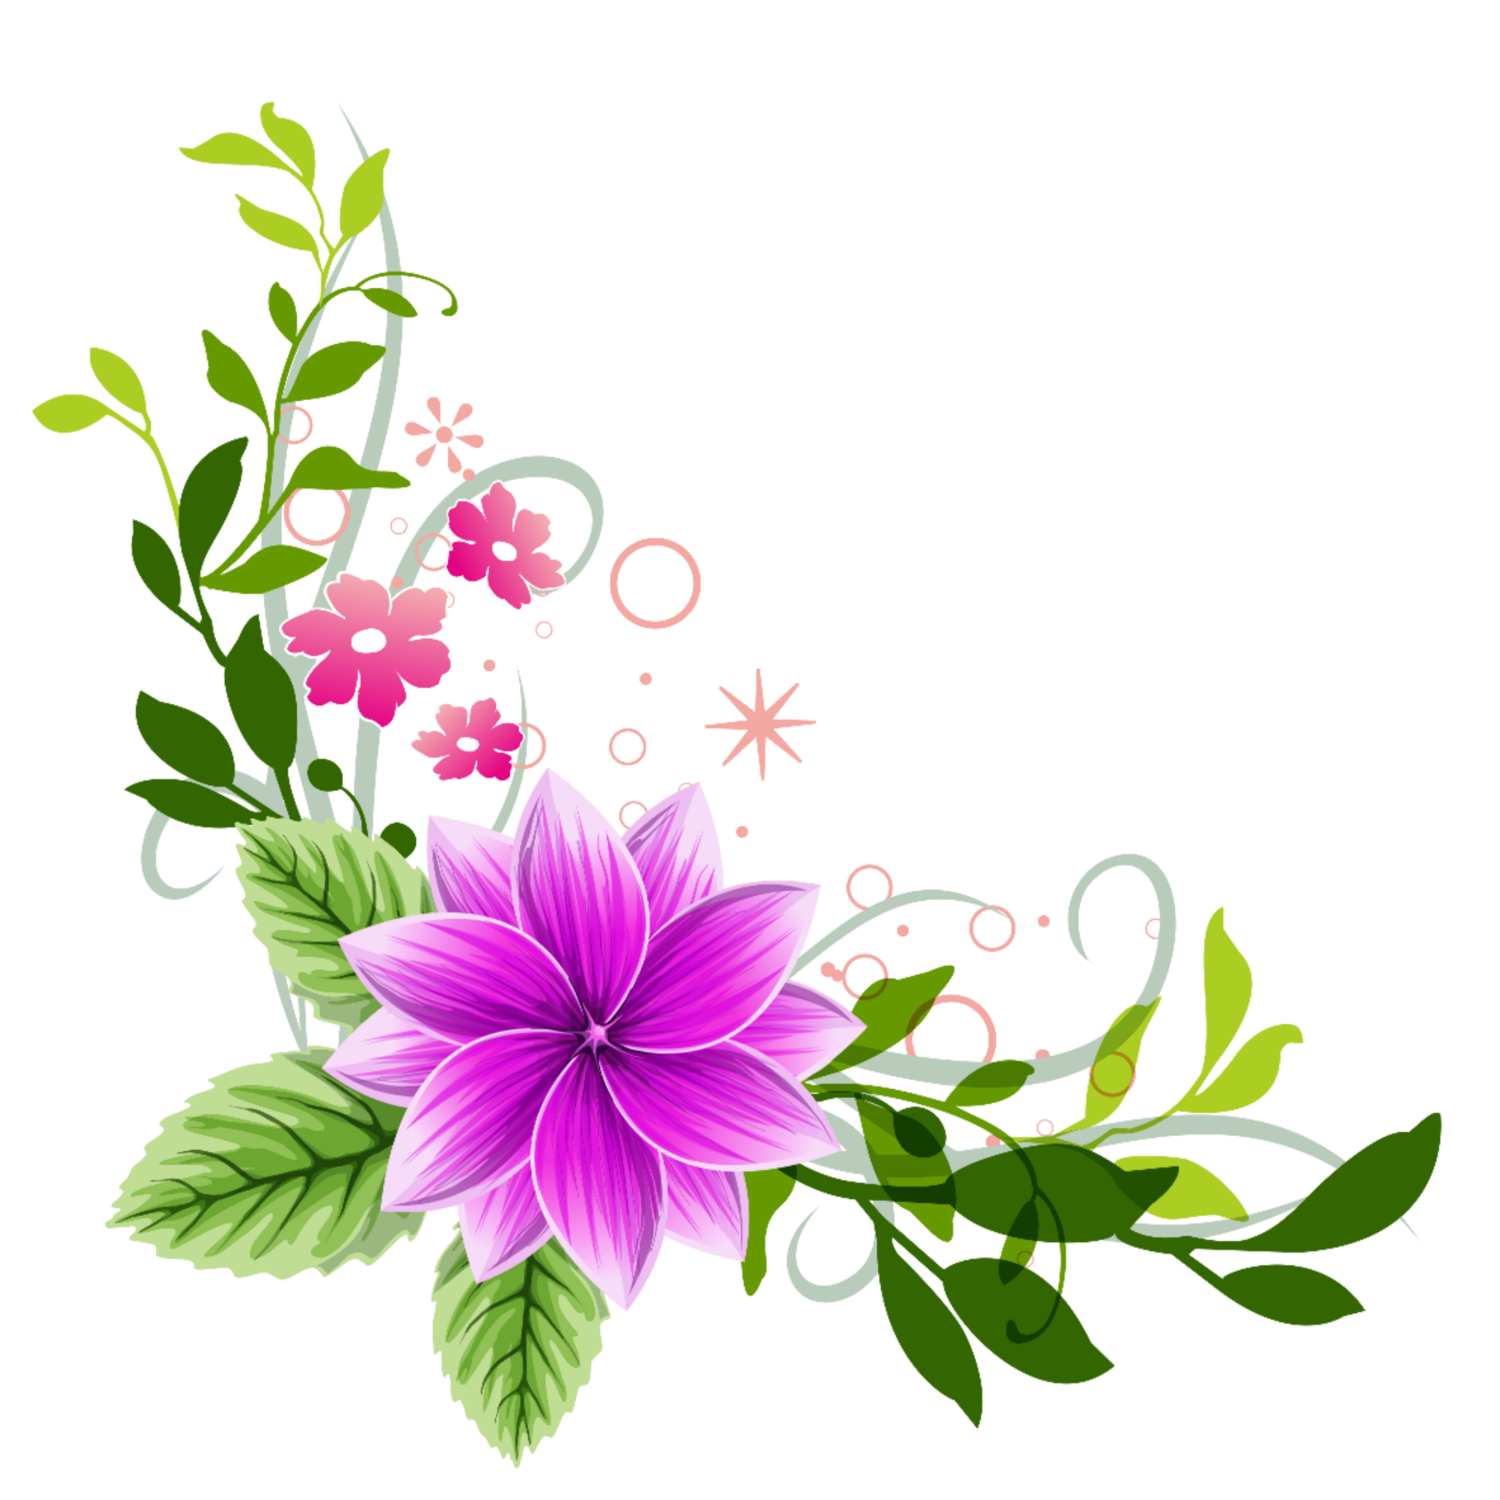 Rustic Flower Graphic Clipart PNG Images